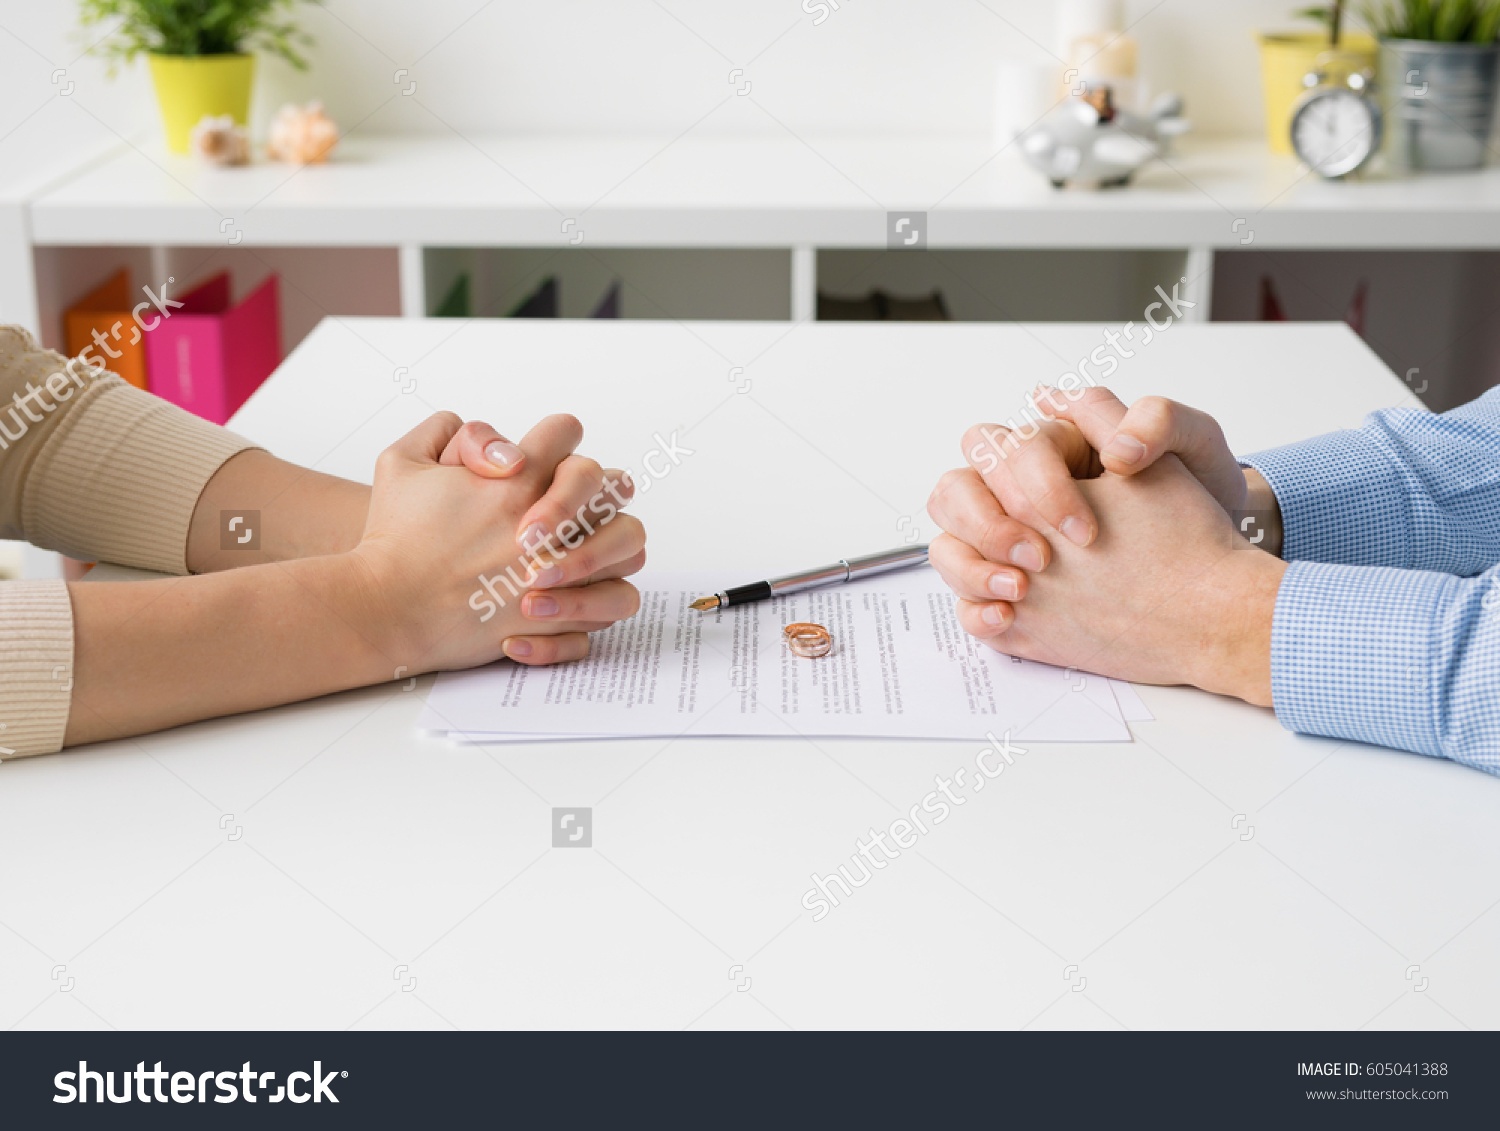 stock-photo-couple-going-through-divorce-signing-papers-605041388.jpg